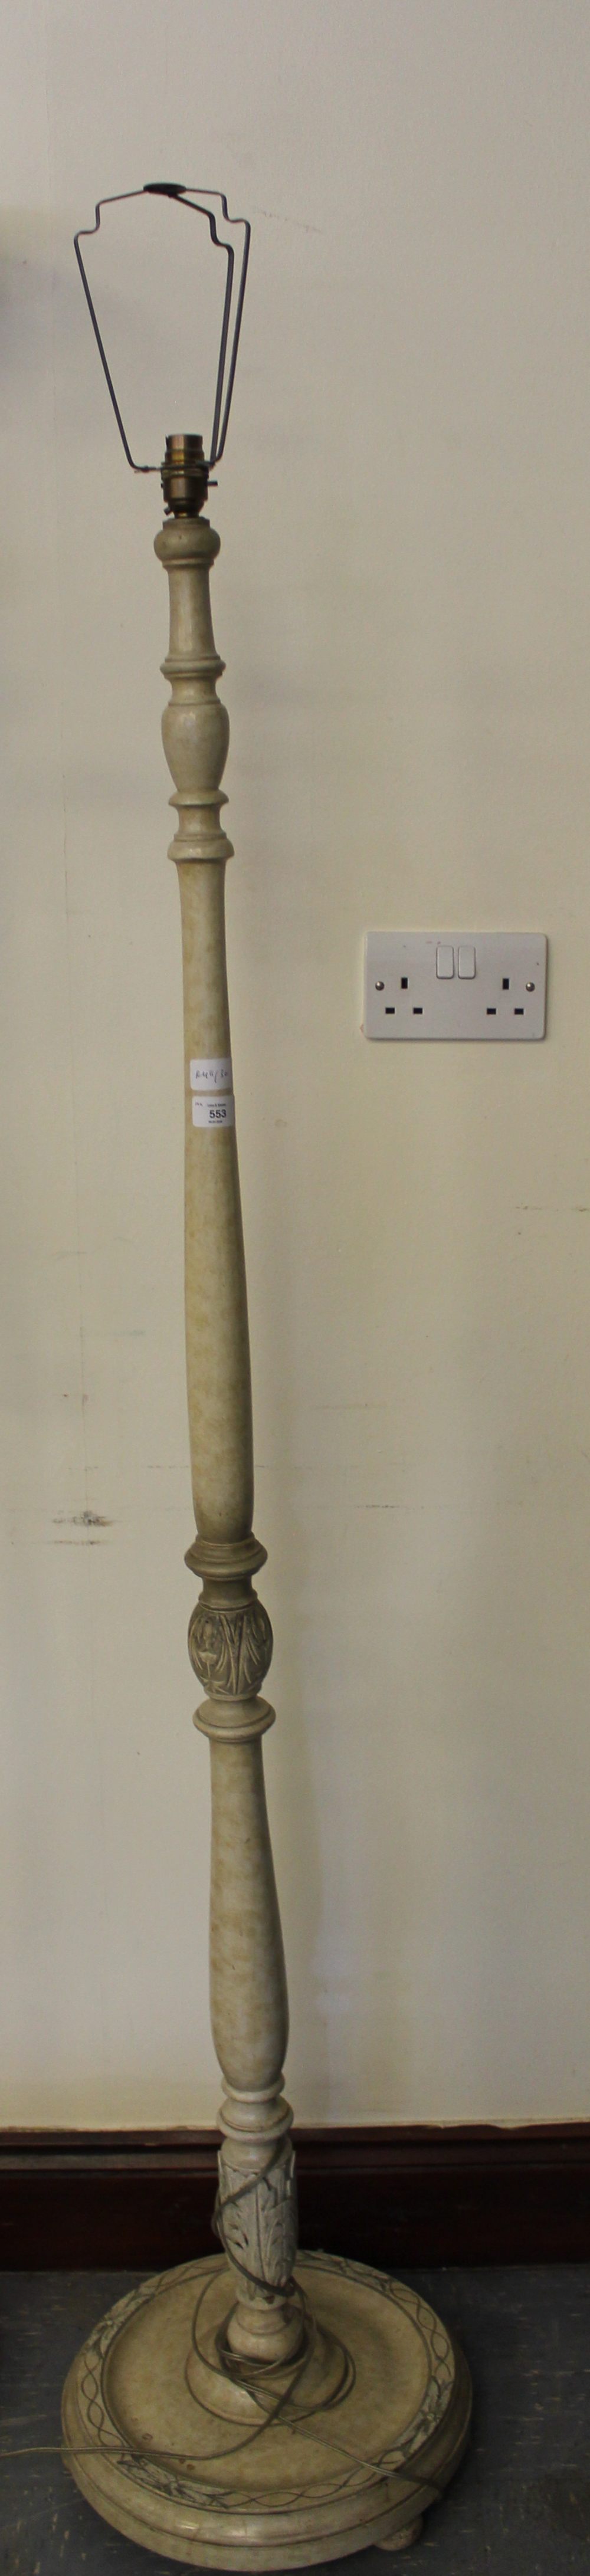 Cream painted electric standard lamp and shade